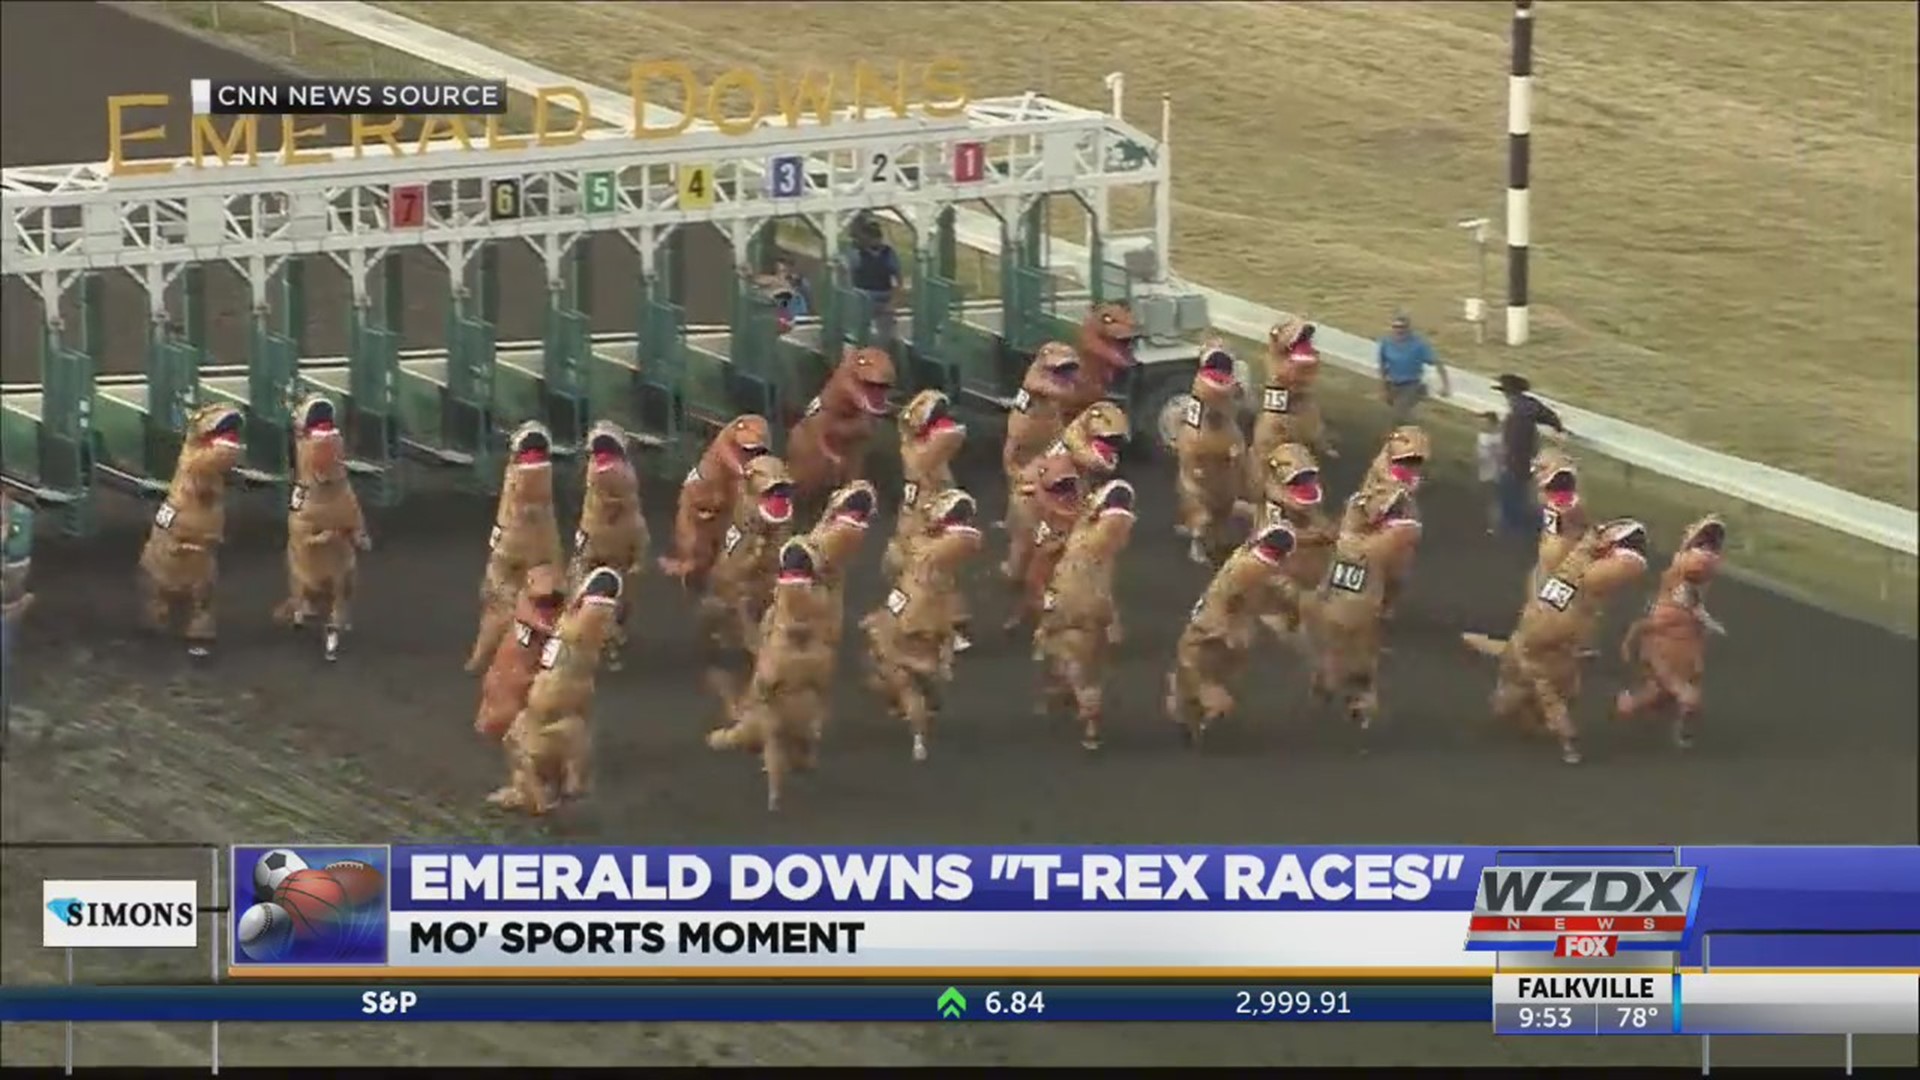 Mo’ Sports Moment TRex Races at Emerald Downs